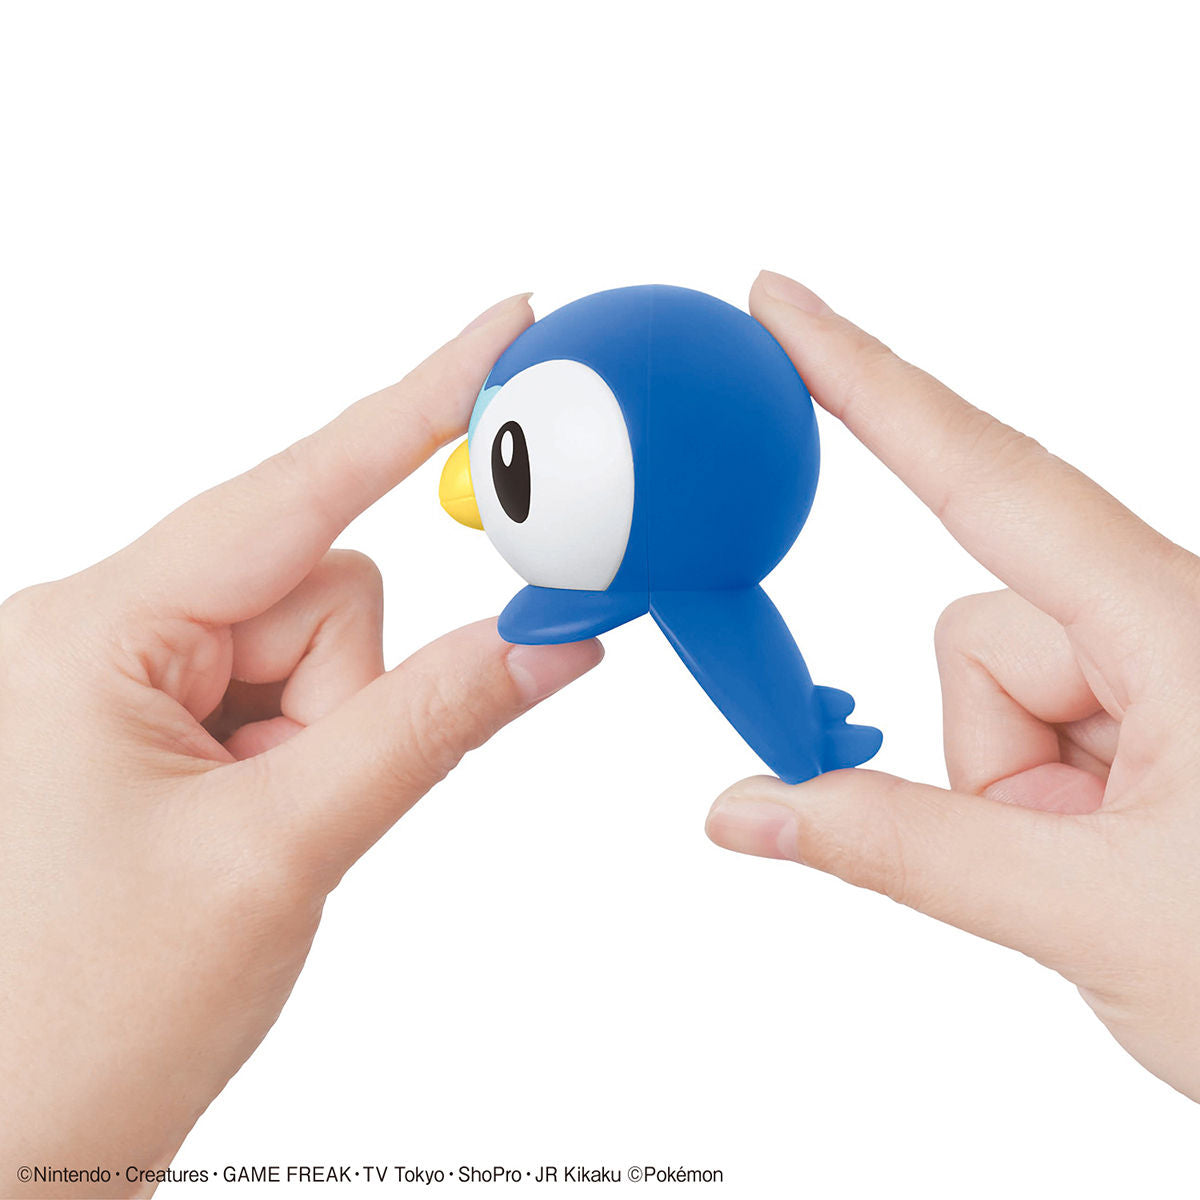 Pokémon - Piplup - Pokémon Model Kit Quick!! Collection No. 06 (Bandai), Simple and easy assembly! Perfect for first-time model kit experience, the "Poképla Quick!!" series introduces Piplup! With only 12 parts, you can create a Piplup figure measuring approximately 75mm in height.